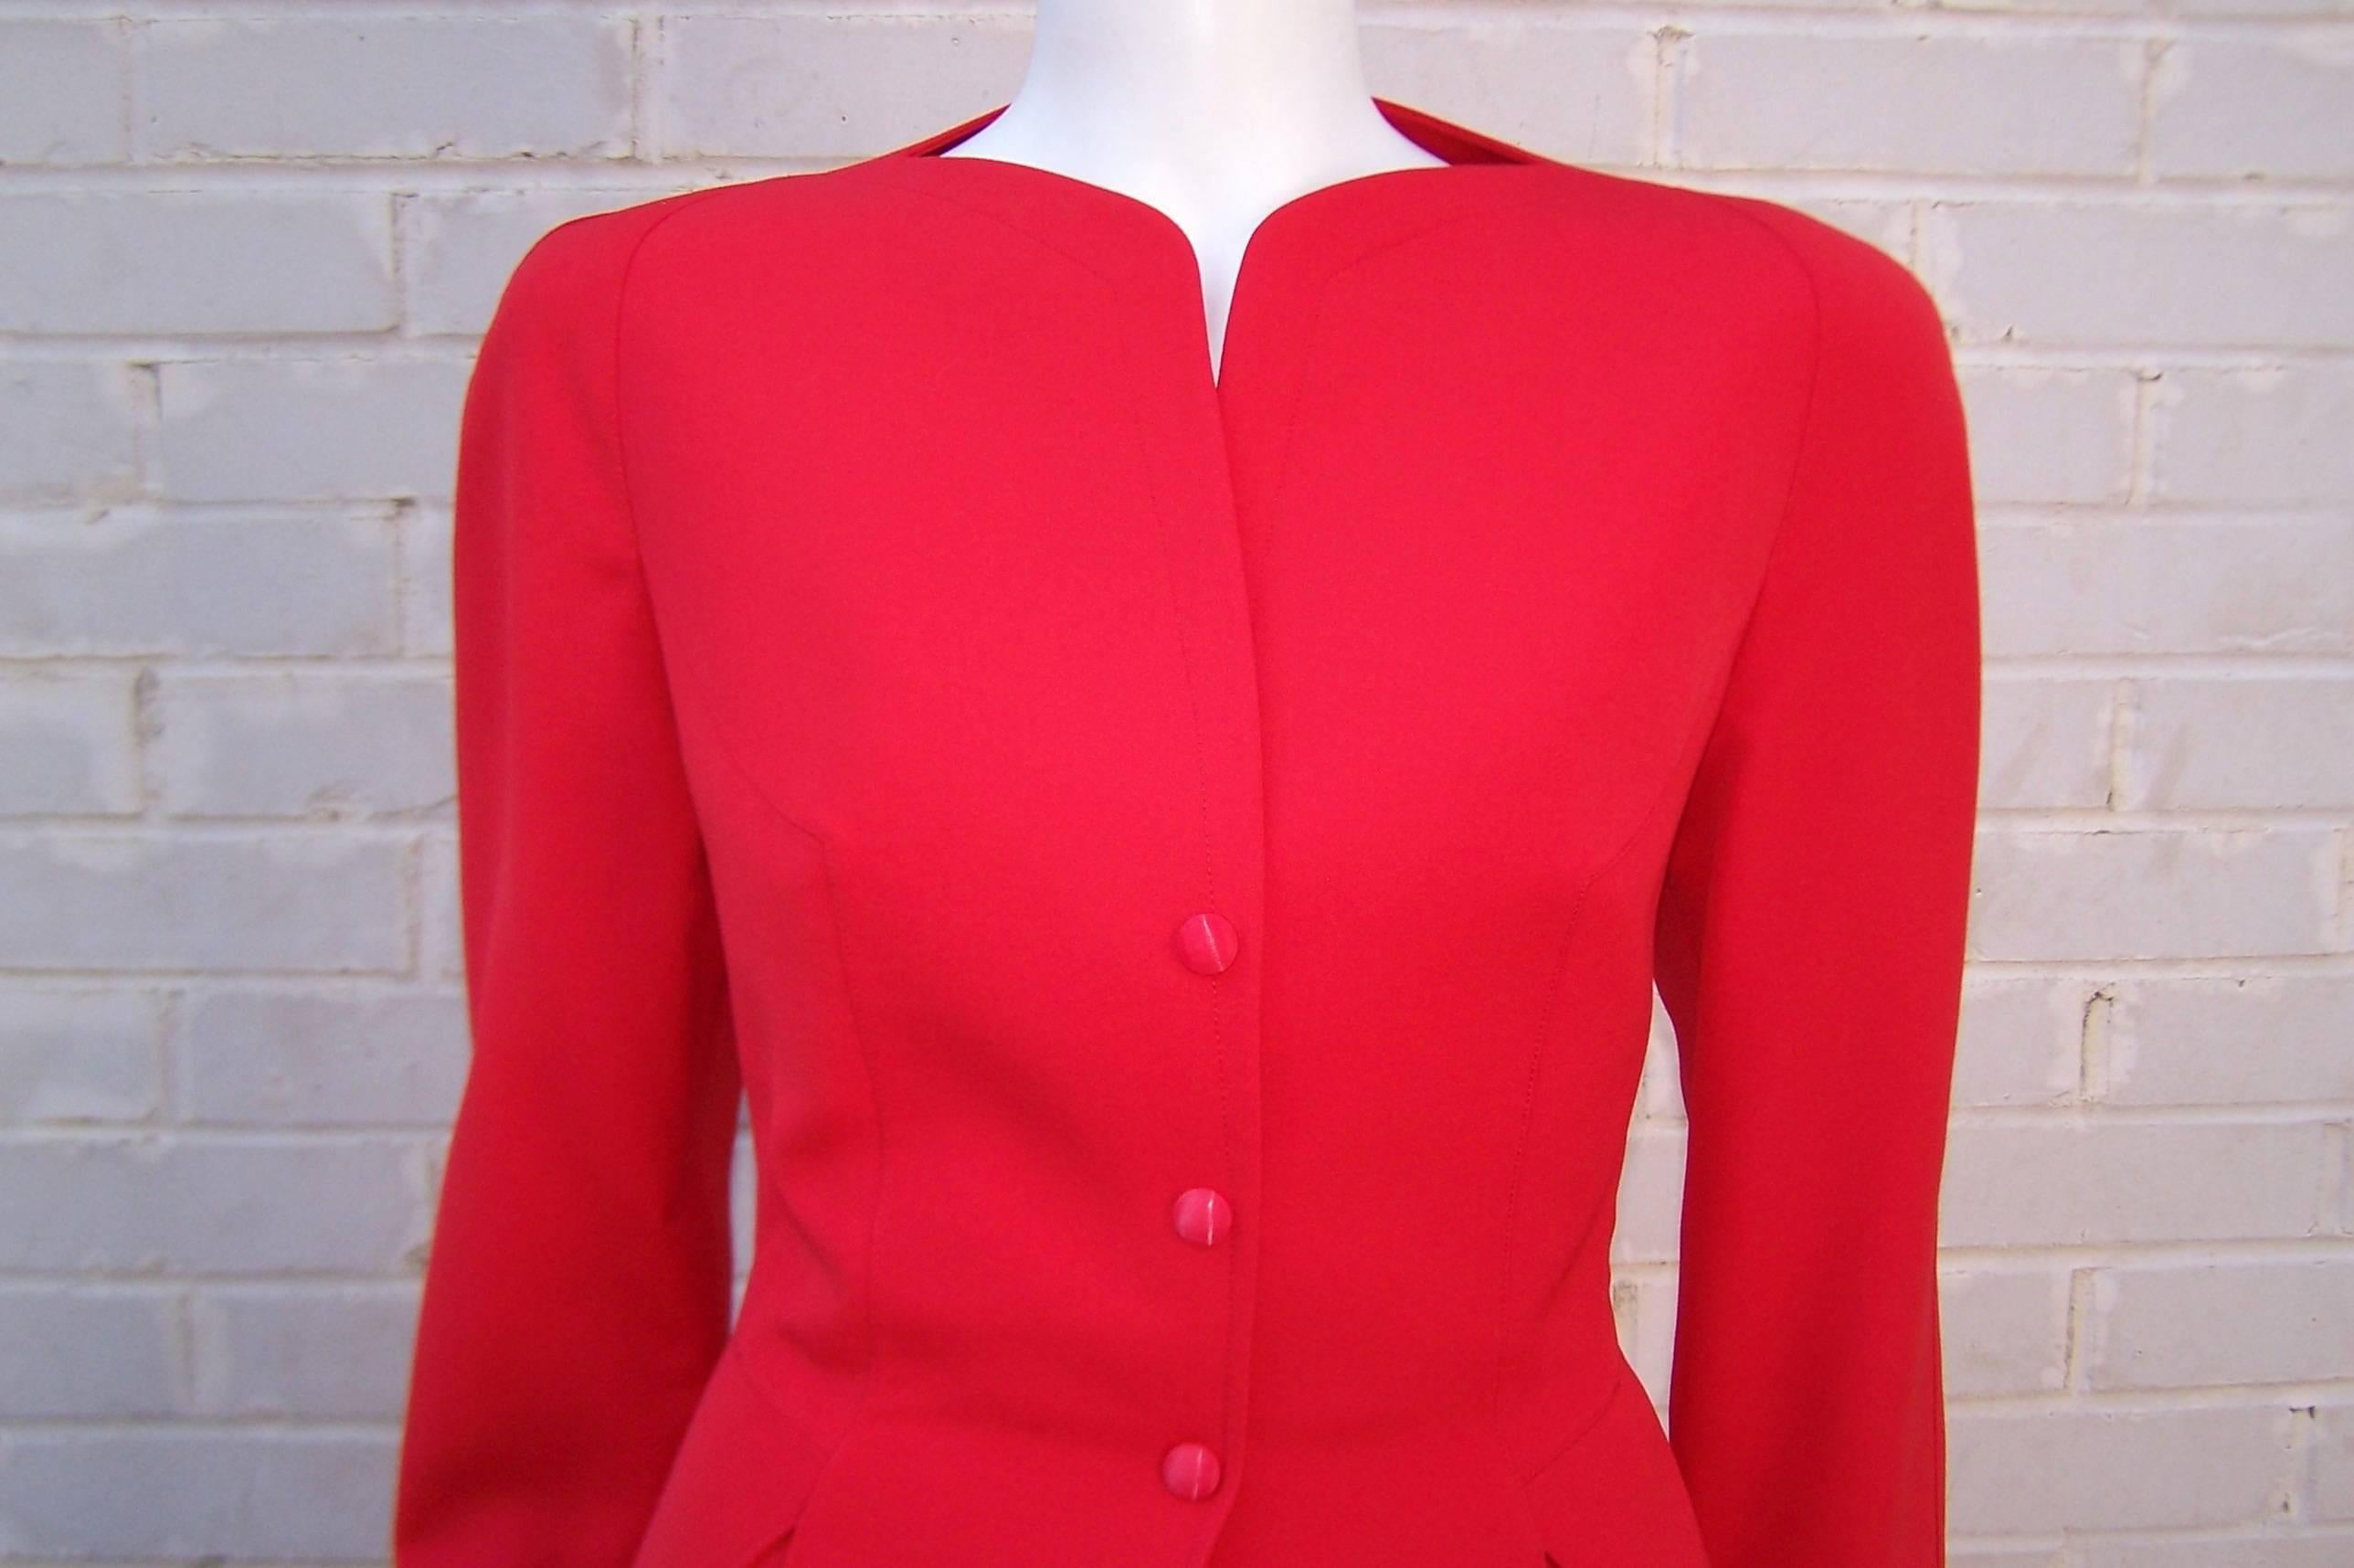 c.1990 Thierry Mugler Fiery Red Suit With Star Pockets & Stylized Skirt 4